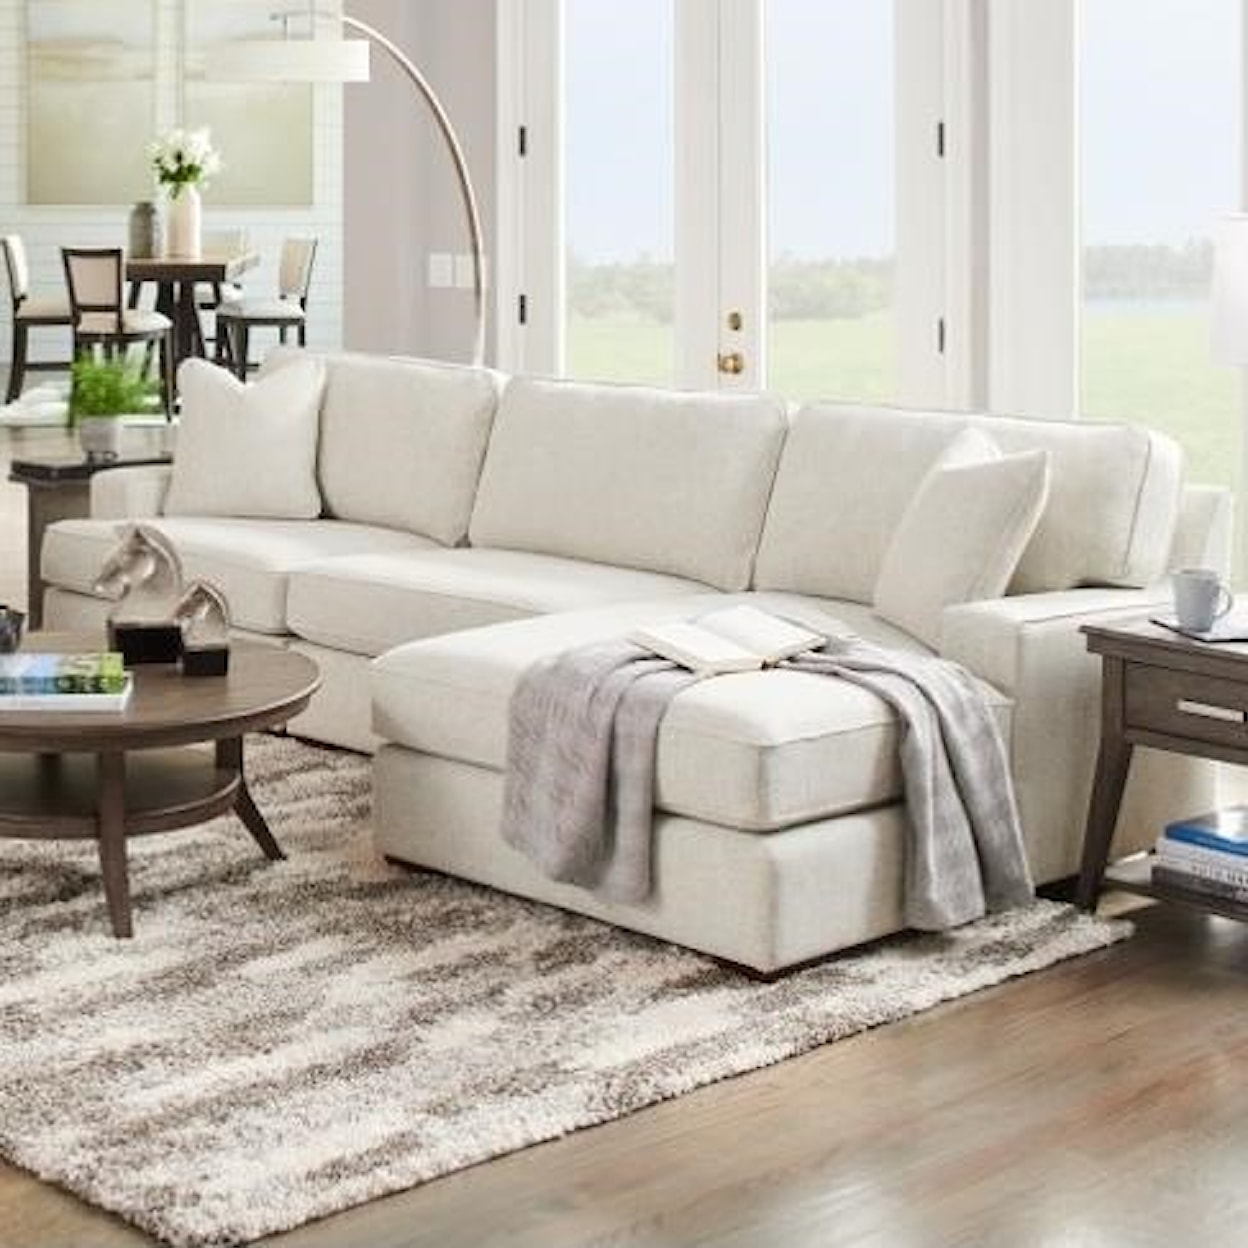 La-Z-Boy Paxton 60B663 3-Seat Chaise Sectional with Wide Chaise and ...